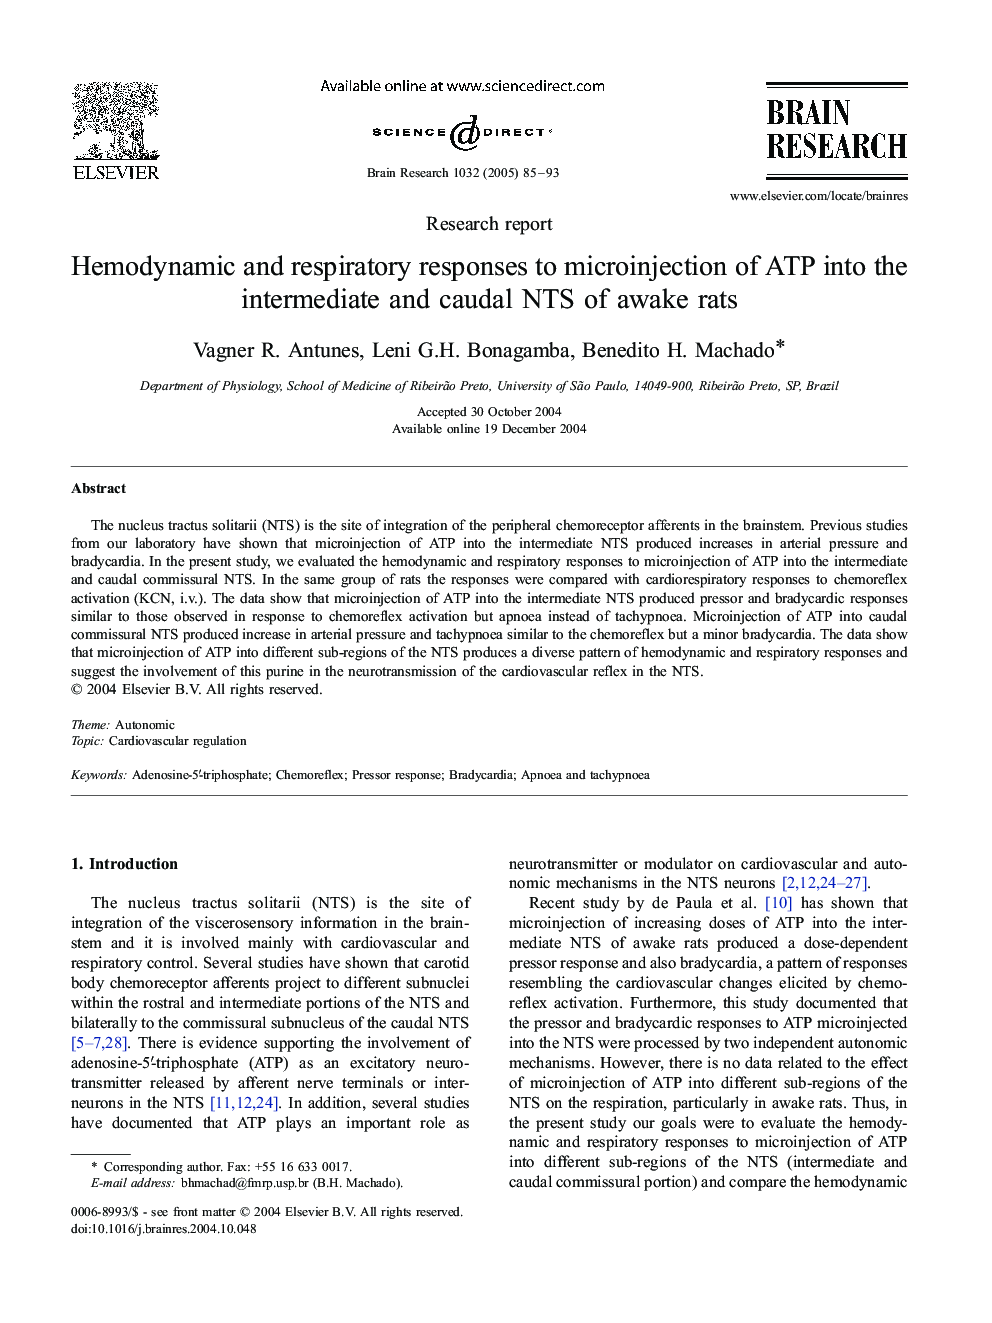 Hemodynamic and respiratory responses to microinjection of ATP into the intermediate and caudal NTS of awake rats